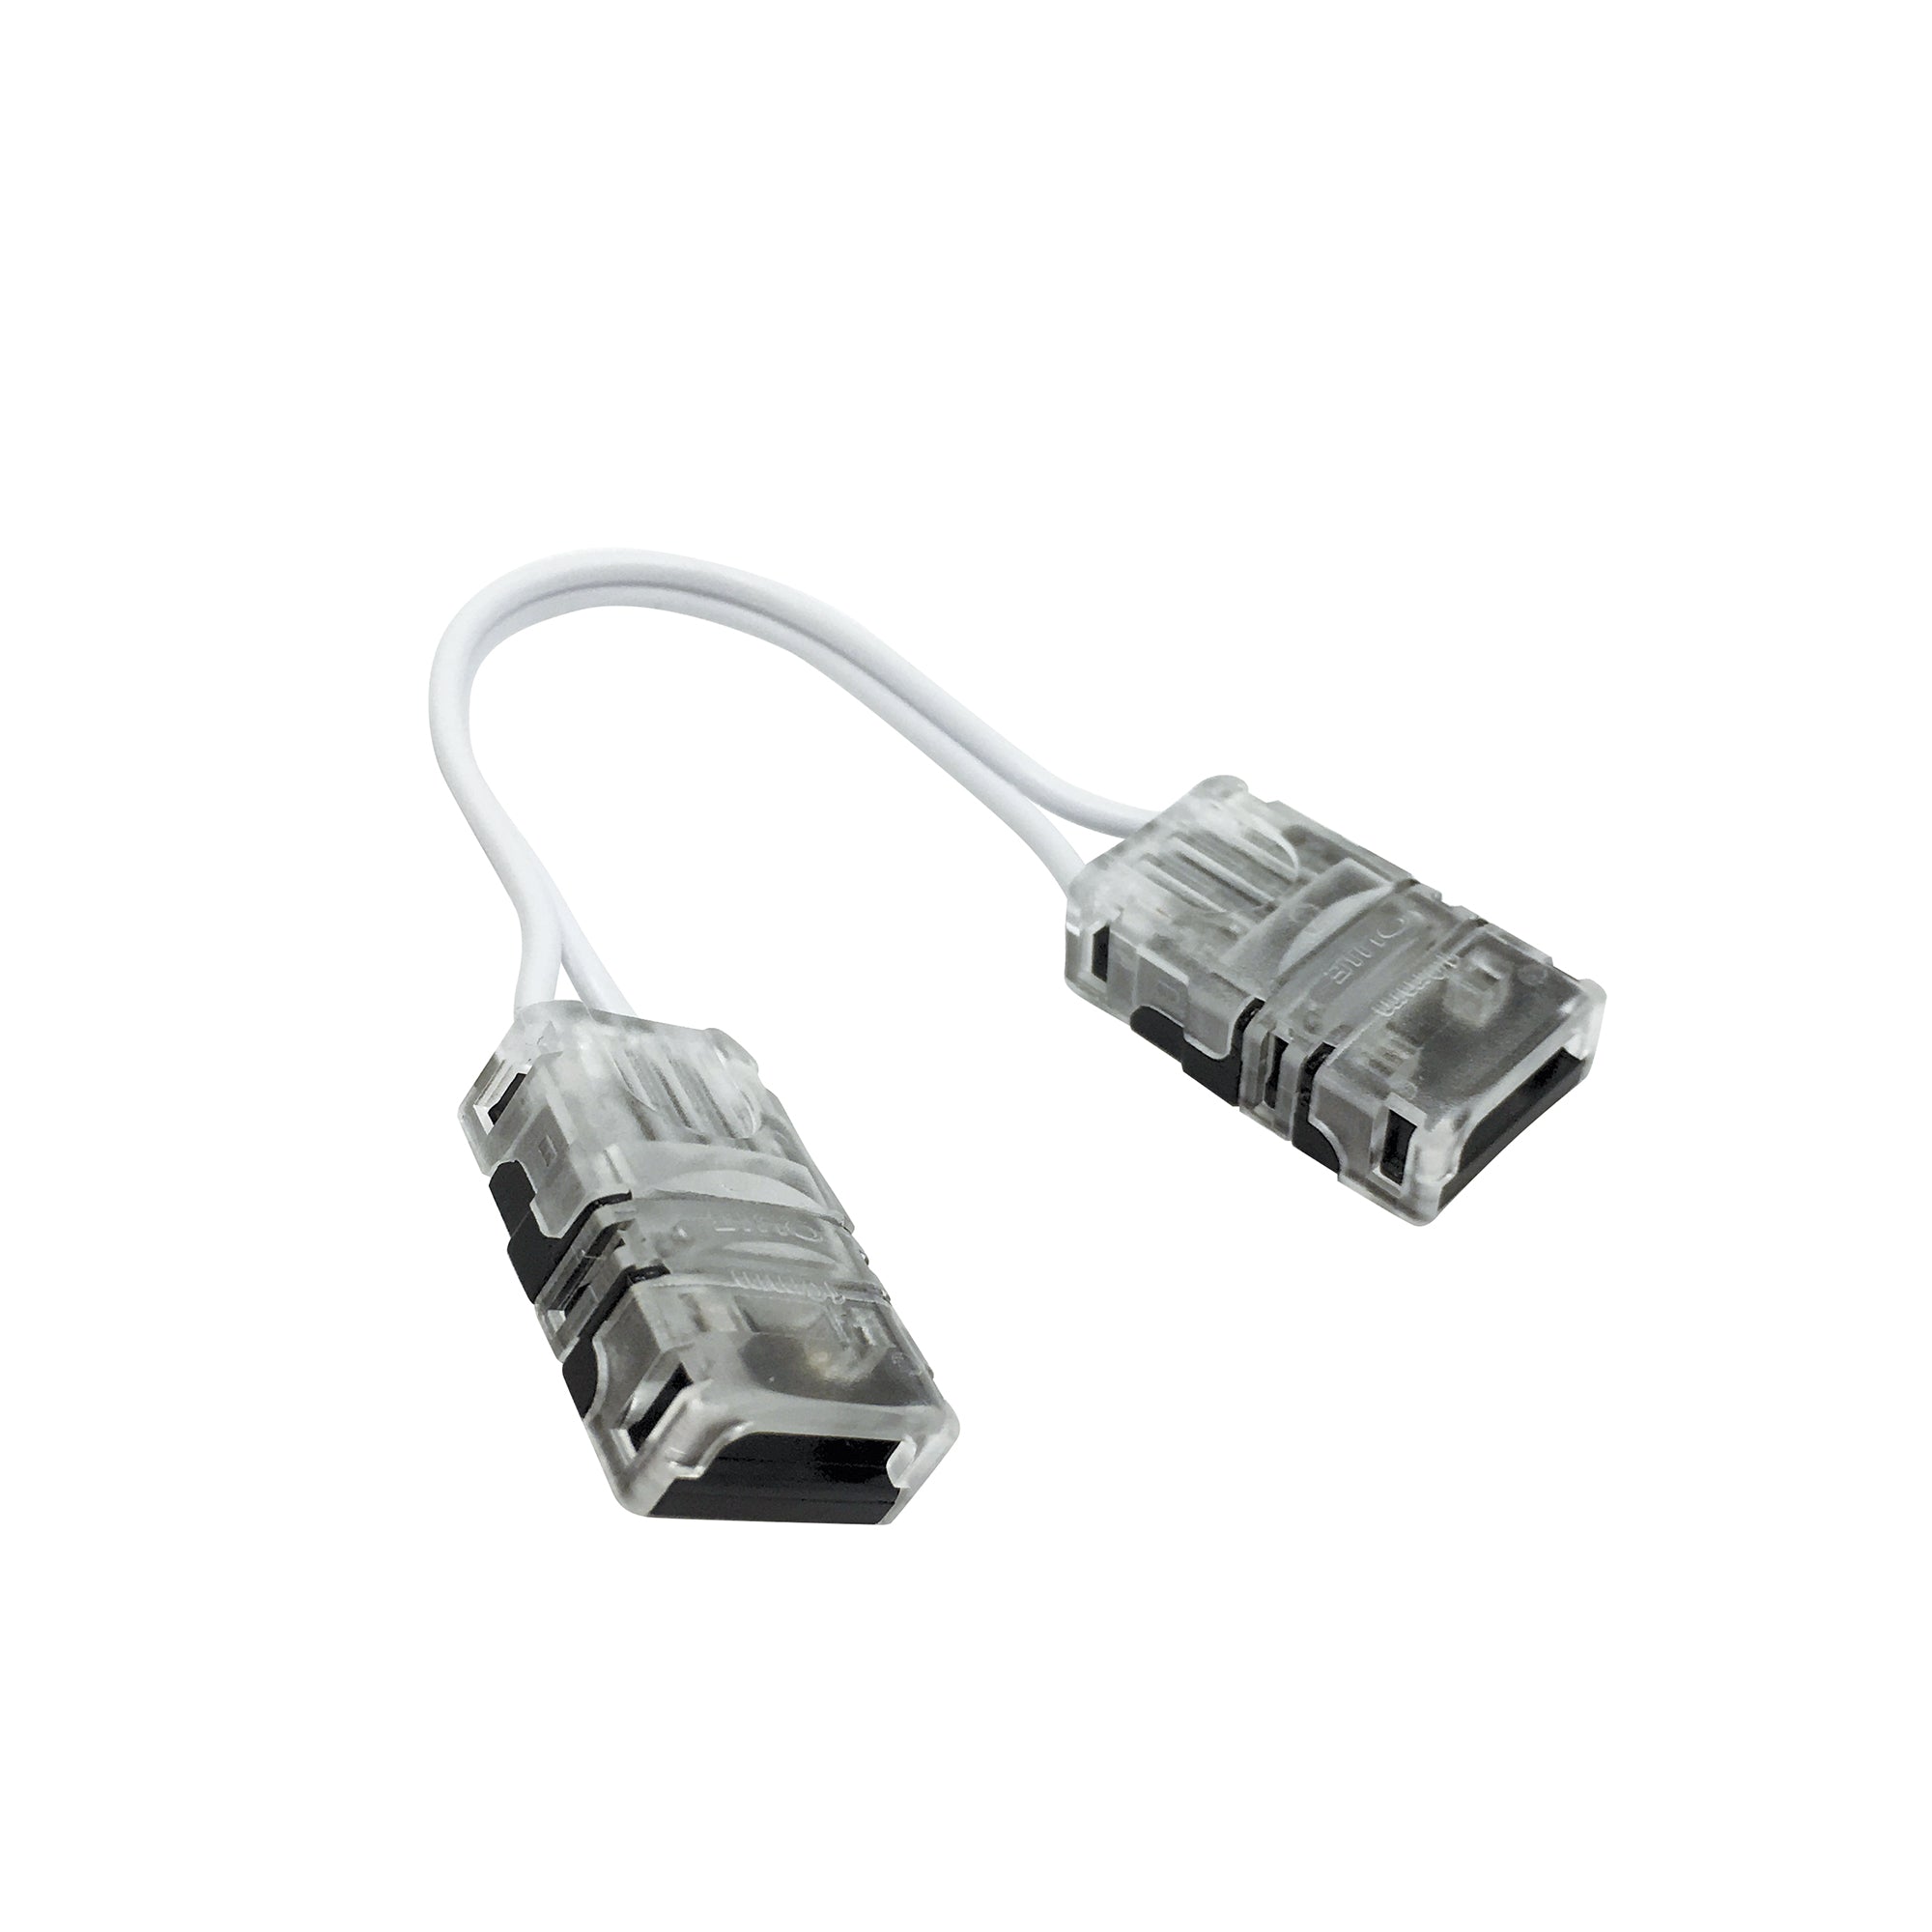 Nora Lighting NATLCD-248 48" Interconnection Cable For NUTP12 Comfort Dim Tape Light - White